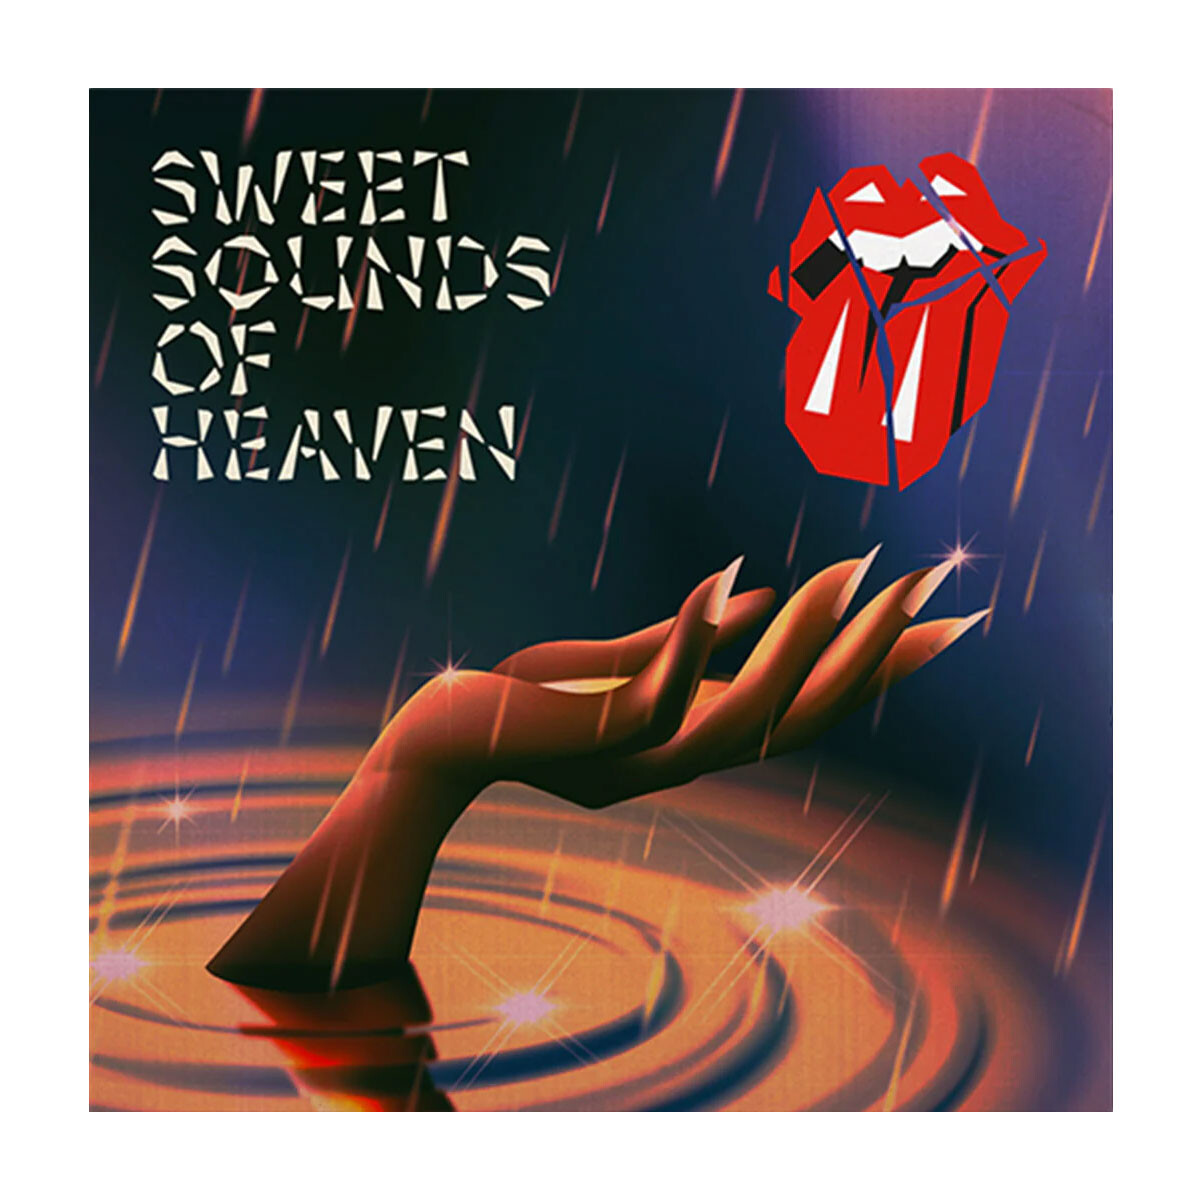 Rolling Stones - Sweet Sounds Of Heaven (etched B-side) - Vinyl 